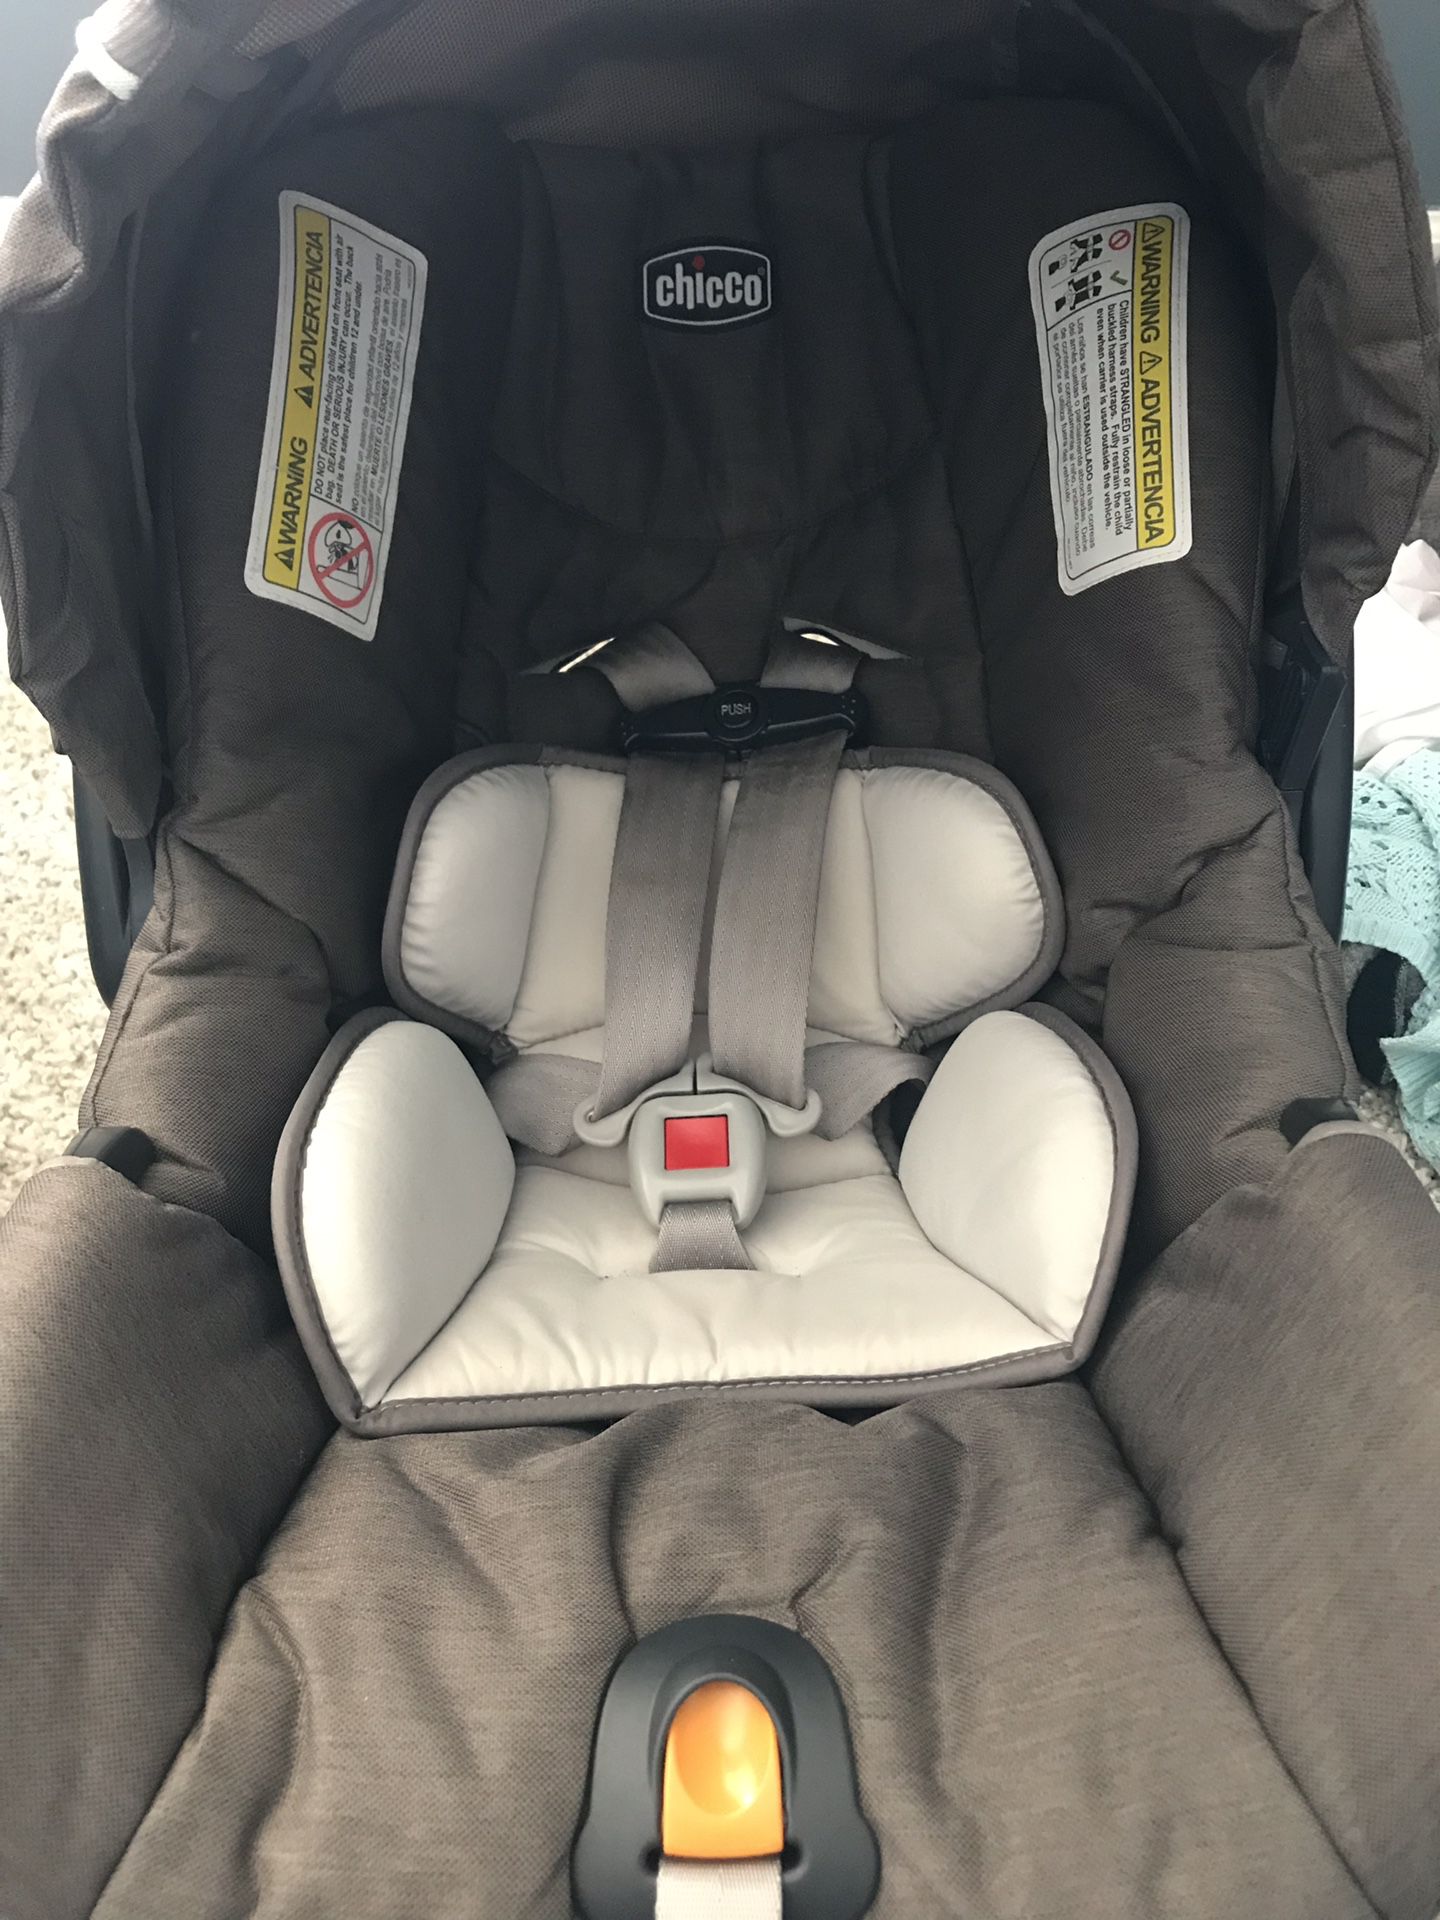 Chicco infant car seat with base